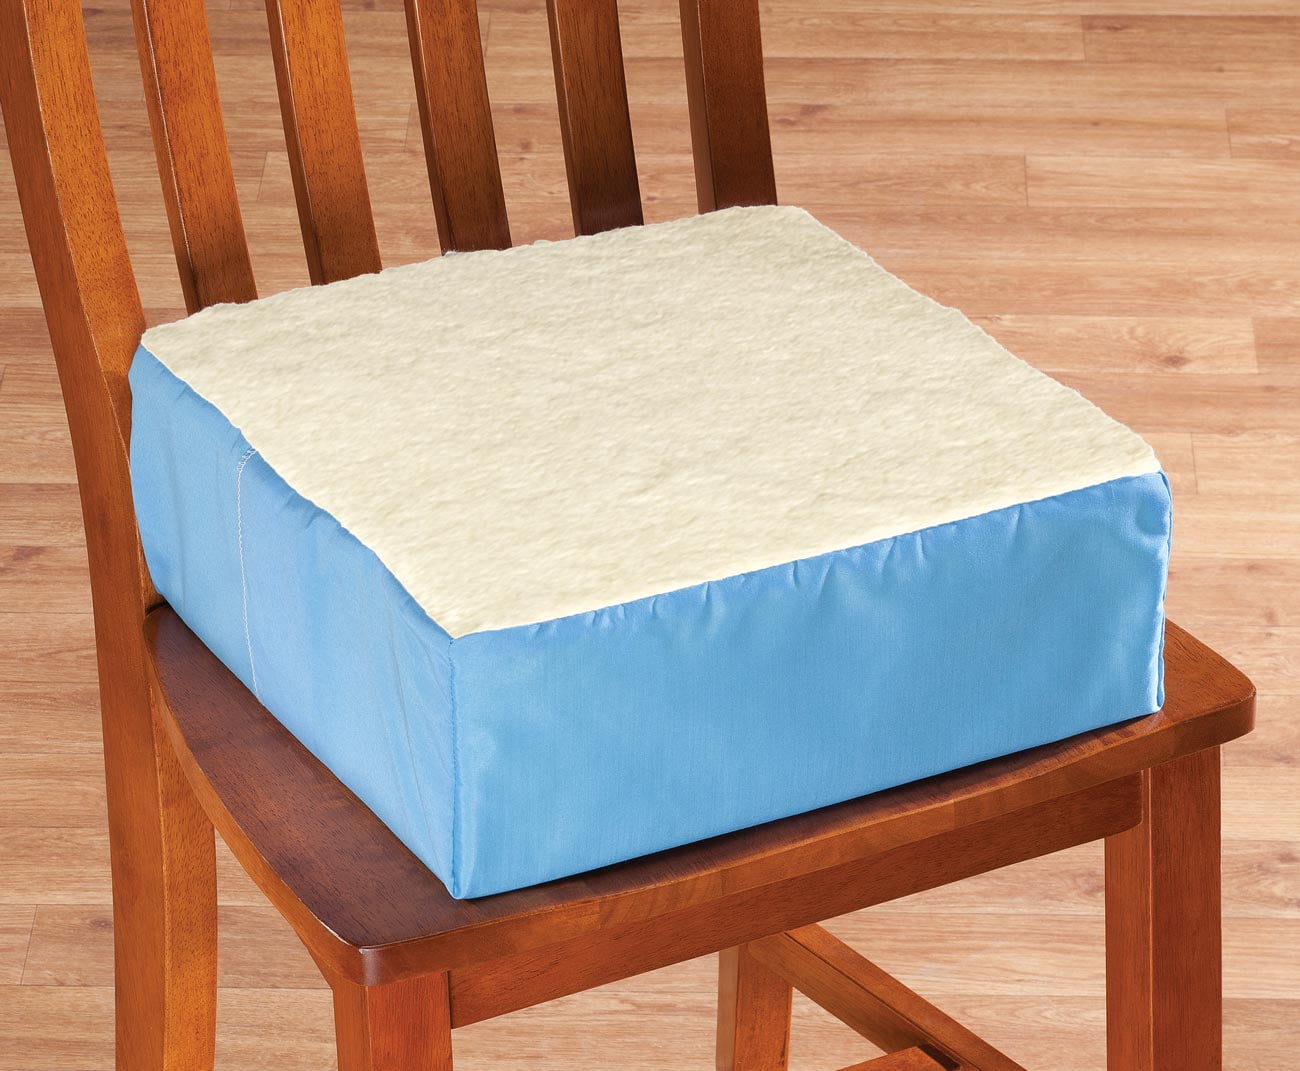 Extra Thick Foam Cushion, Large by LivingSURE - StarCrest